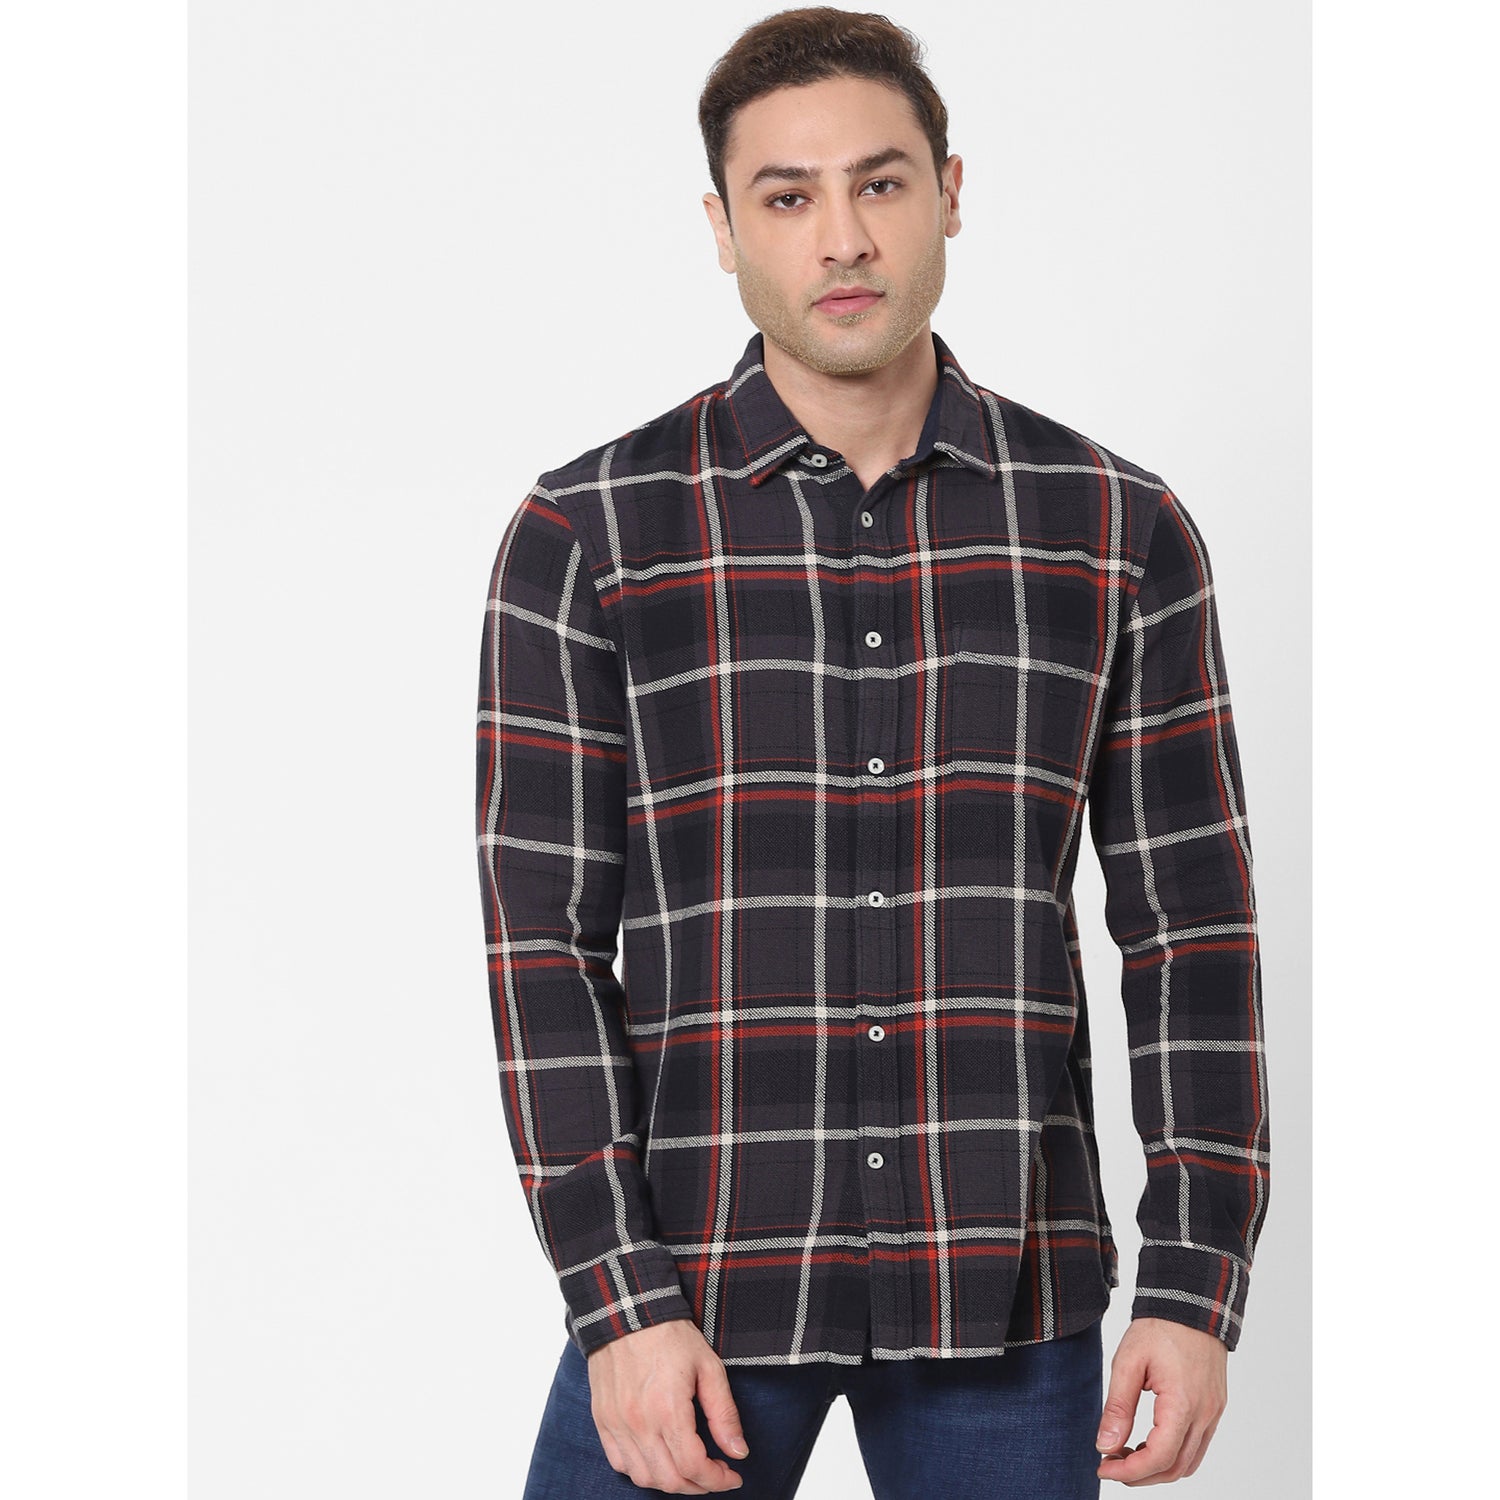 Grey and Red Checked Cotton Casual Shirt (VARACE)